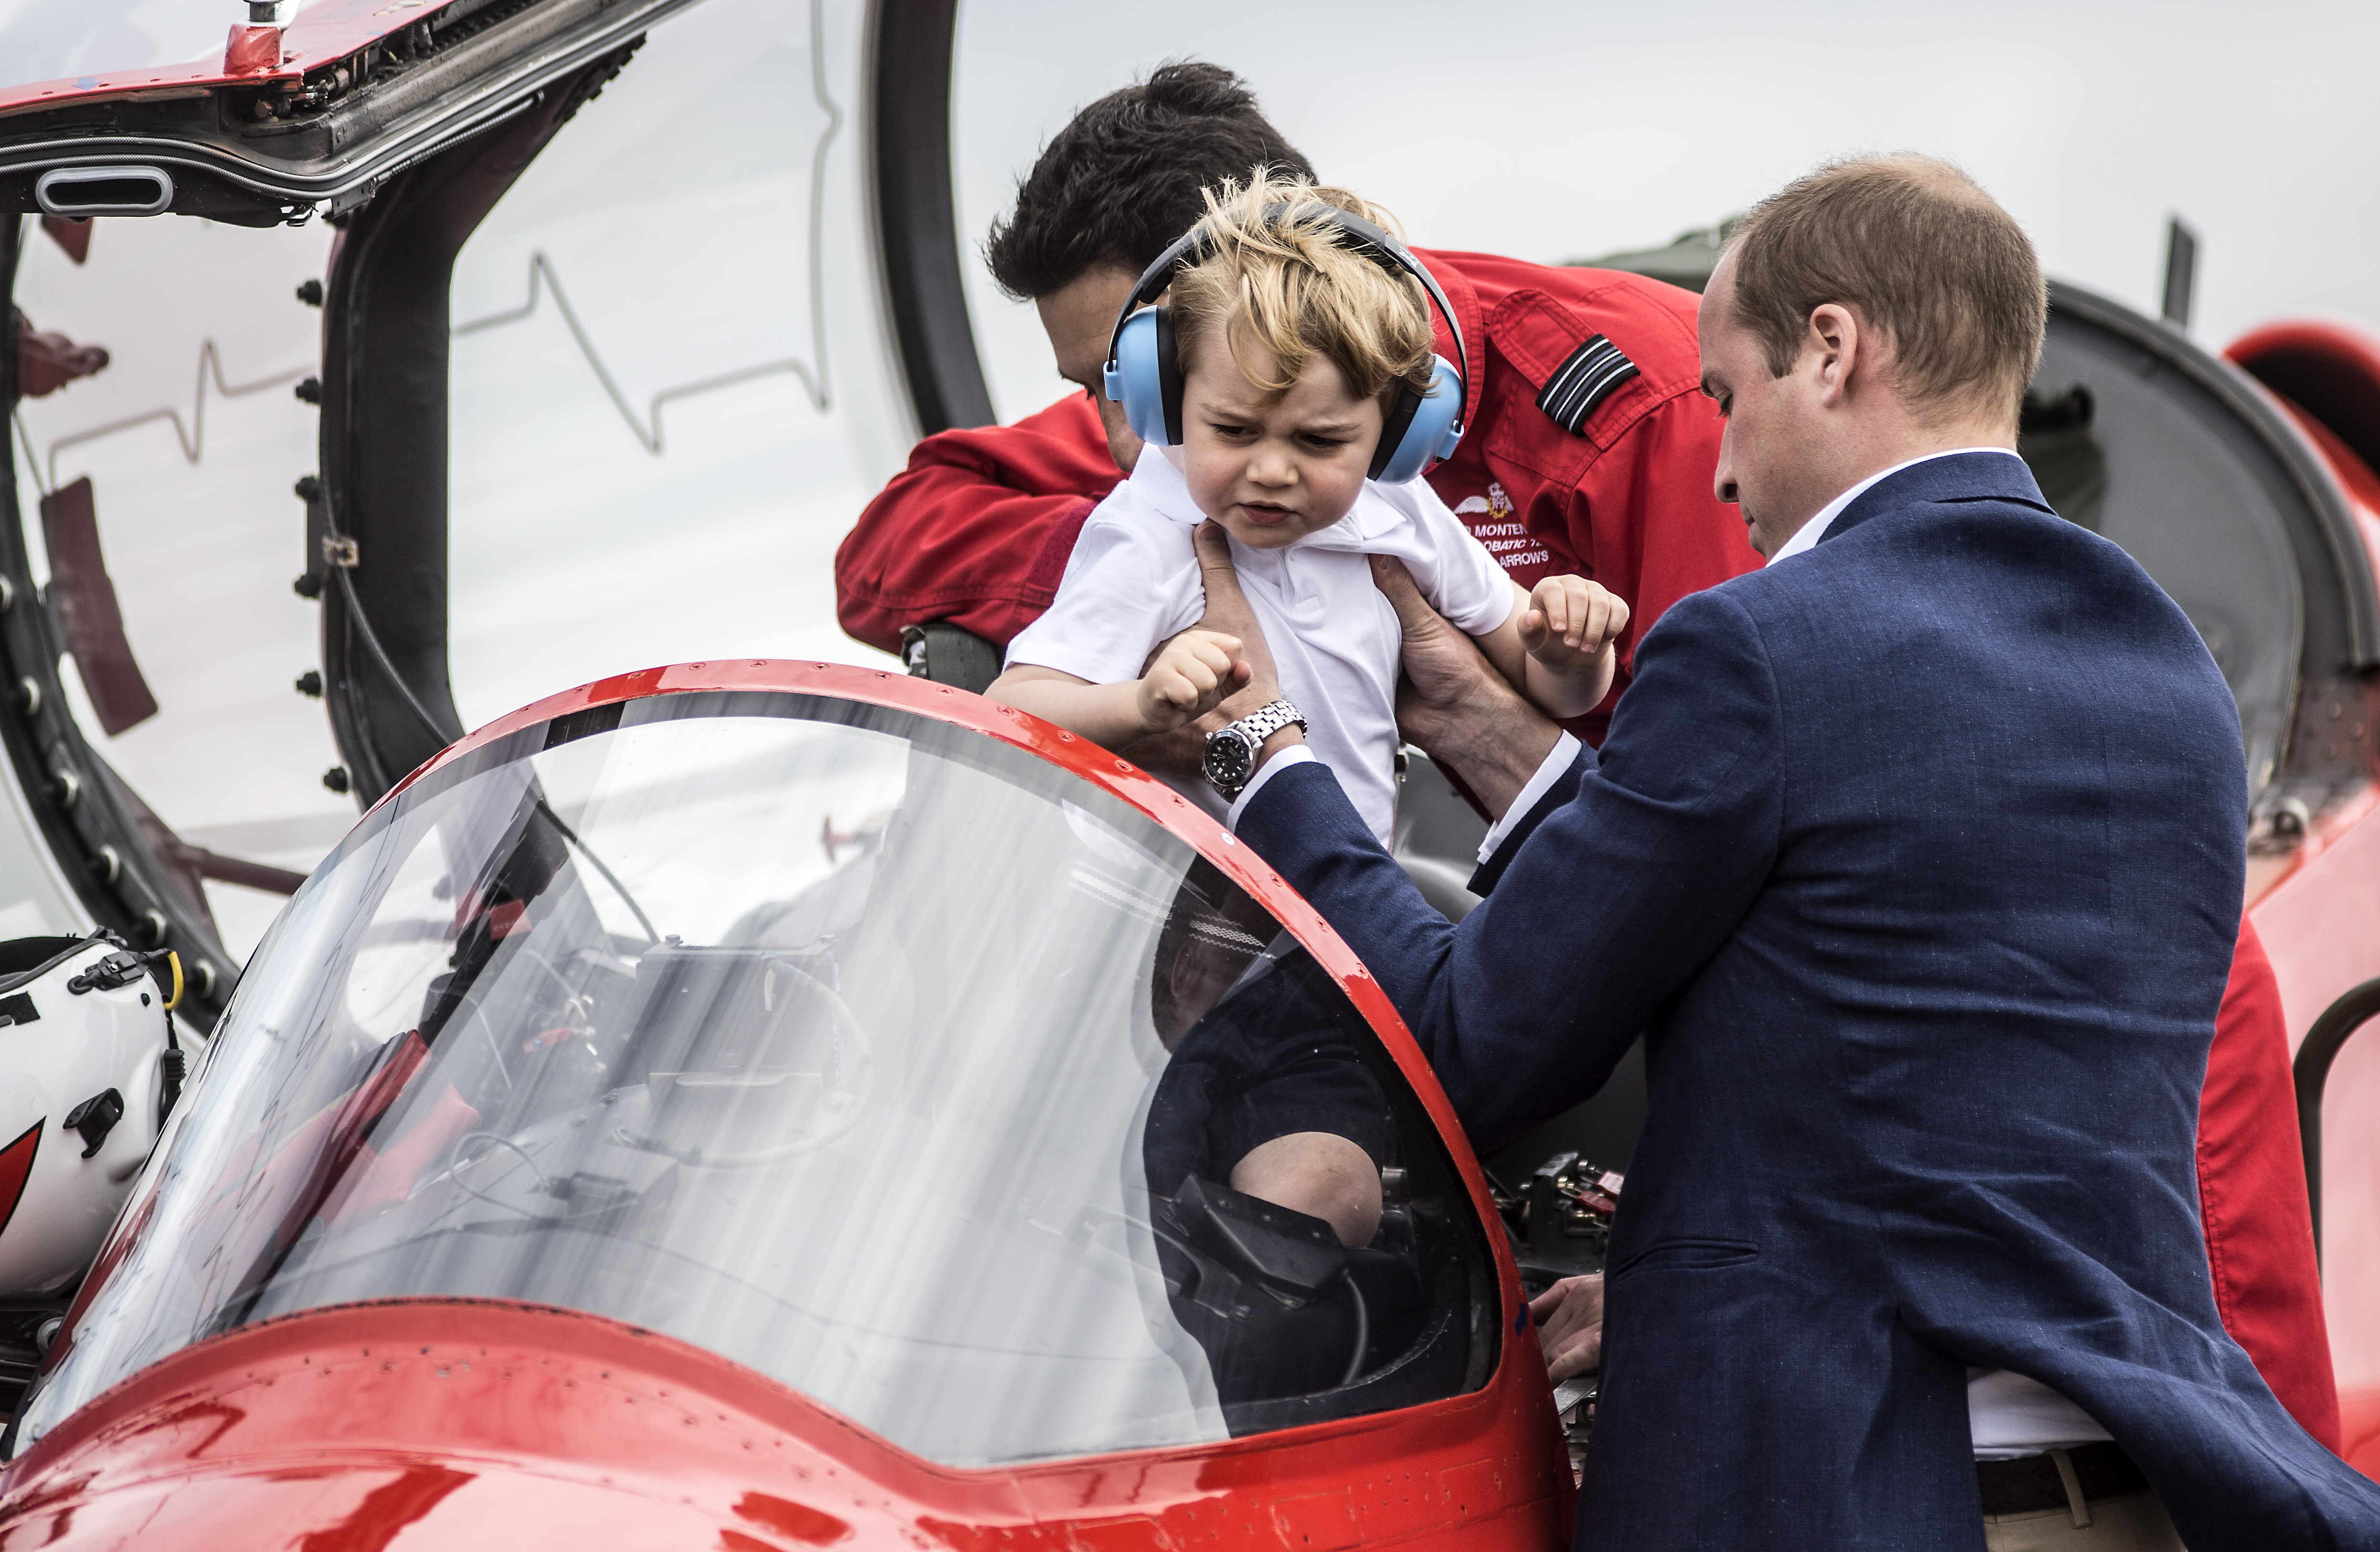 FAIRFORD, WALES - JULY 08: Prince Willliam, Duke of Cambridge lifts Prince George out of the cockpit of a red arrows plane during their visit to the Royal International Air Tattoo at RAF Fairford on July 8, 2016 in Fairford, England.  (Photo by Richard Pohle - WPA Pool/Getty Images)